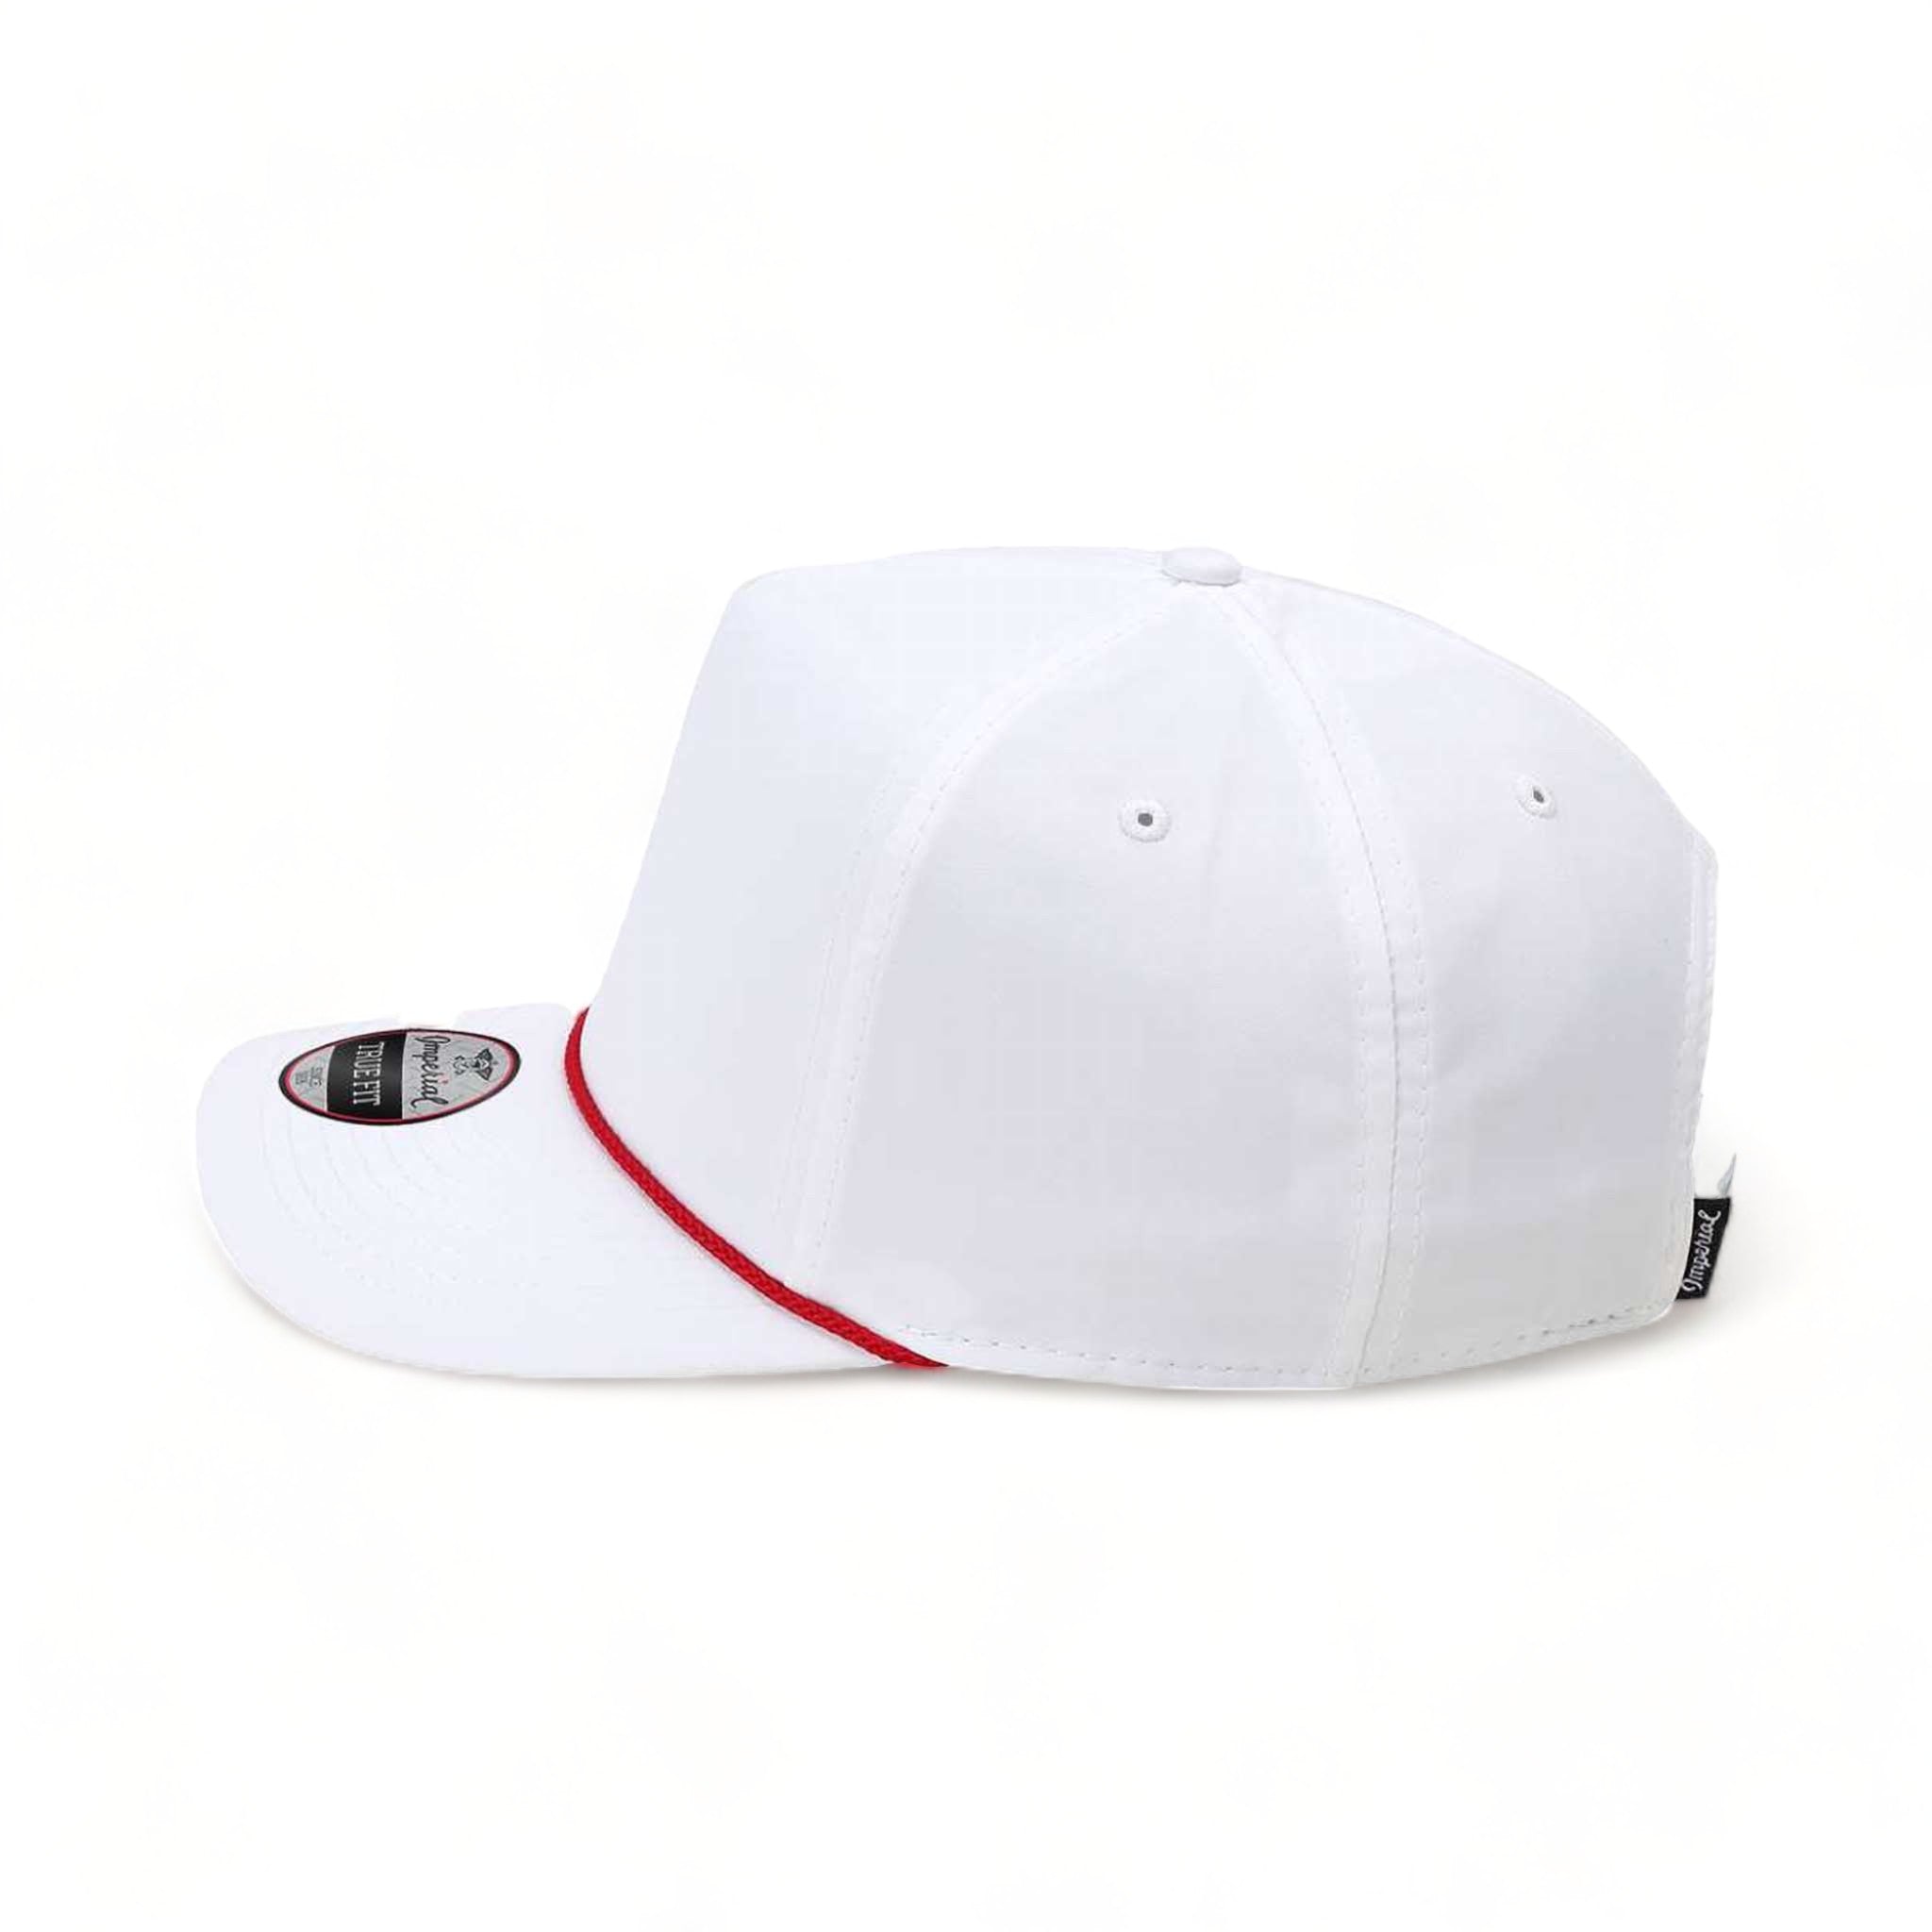 Side view of Imperial 5054 custom hat in white and red